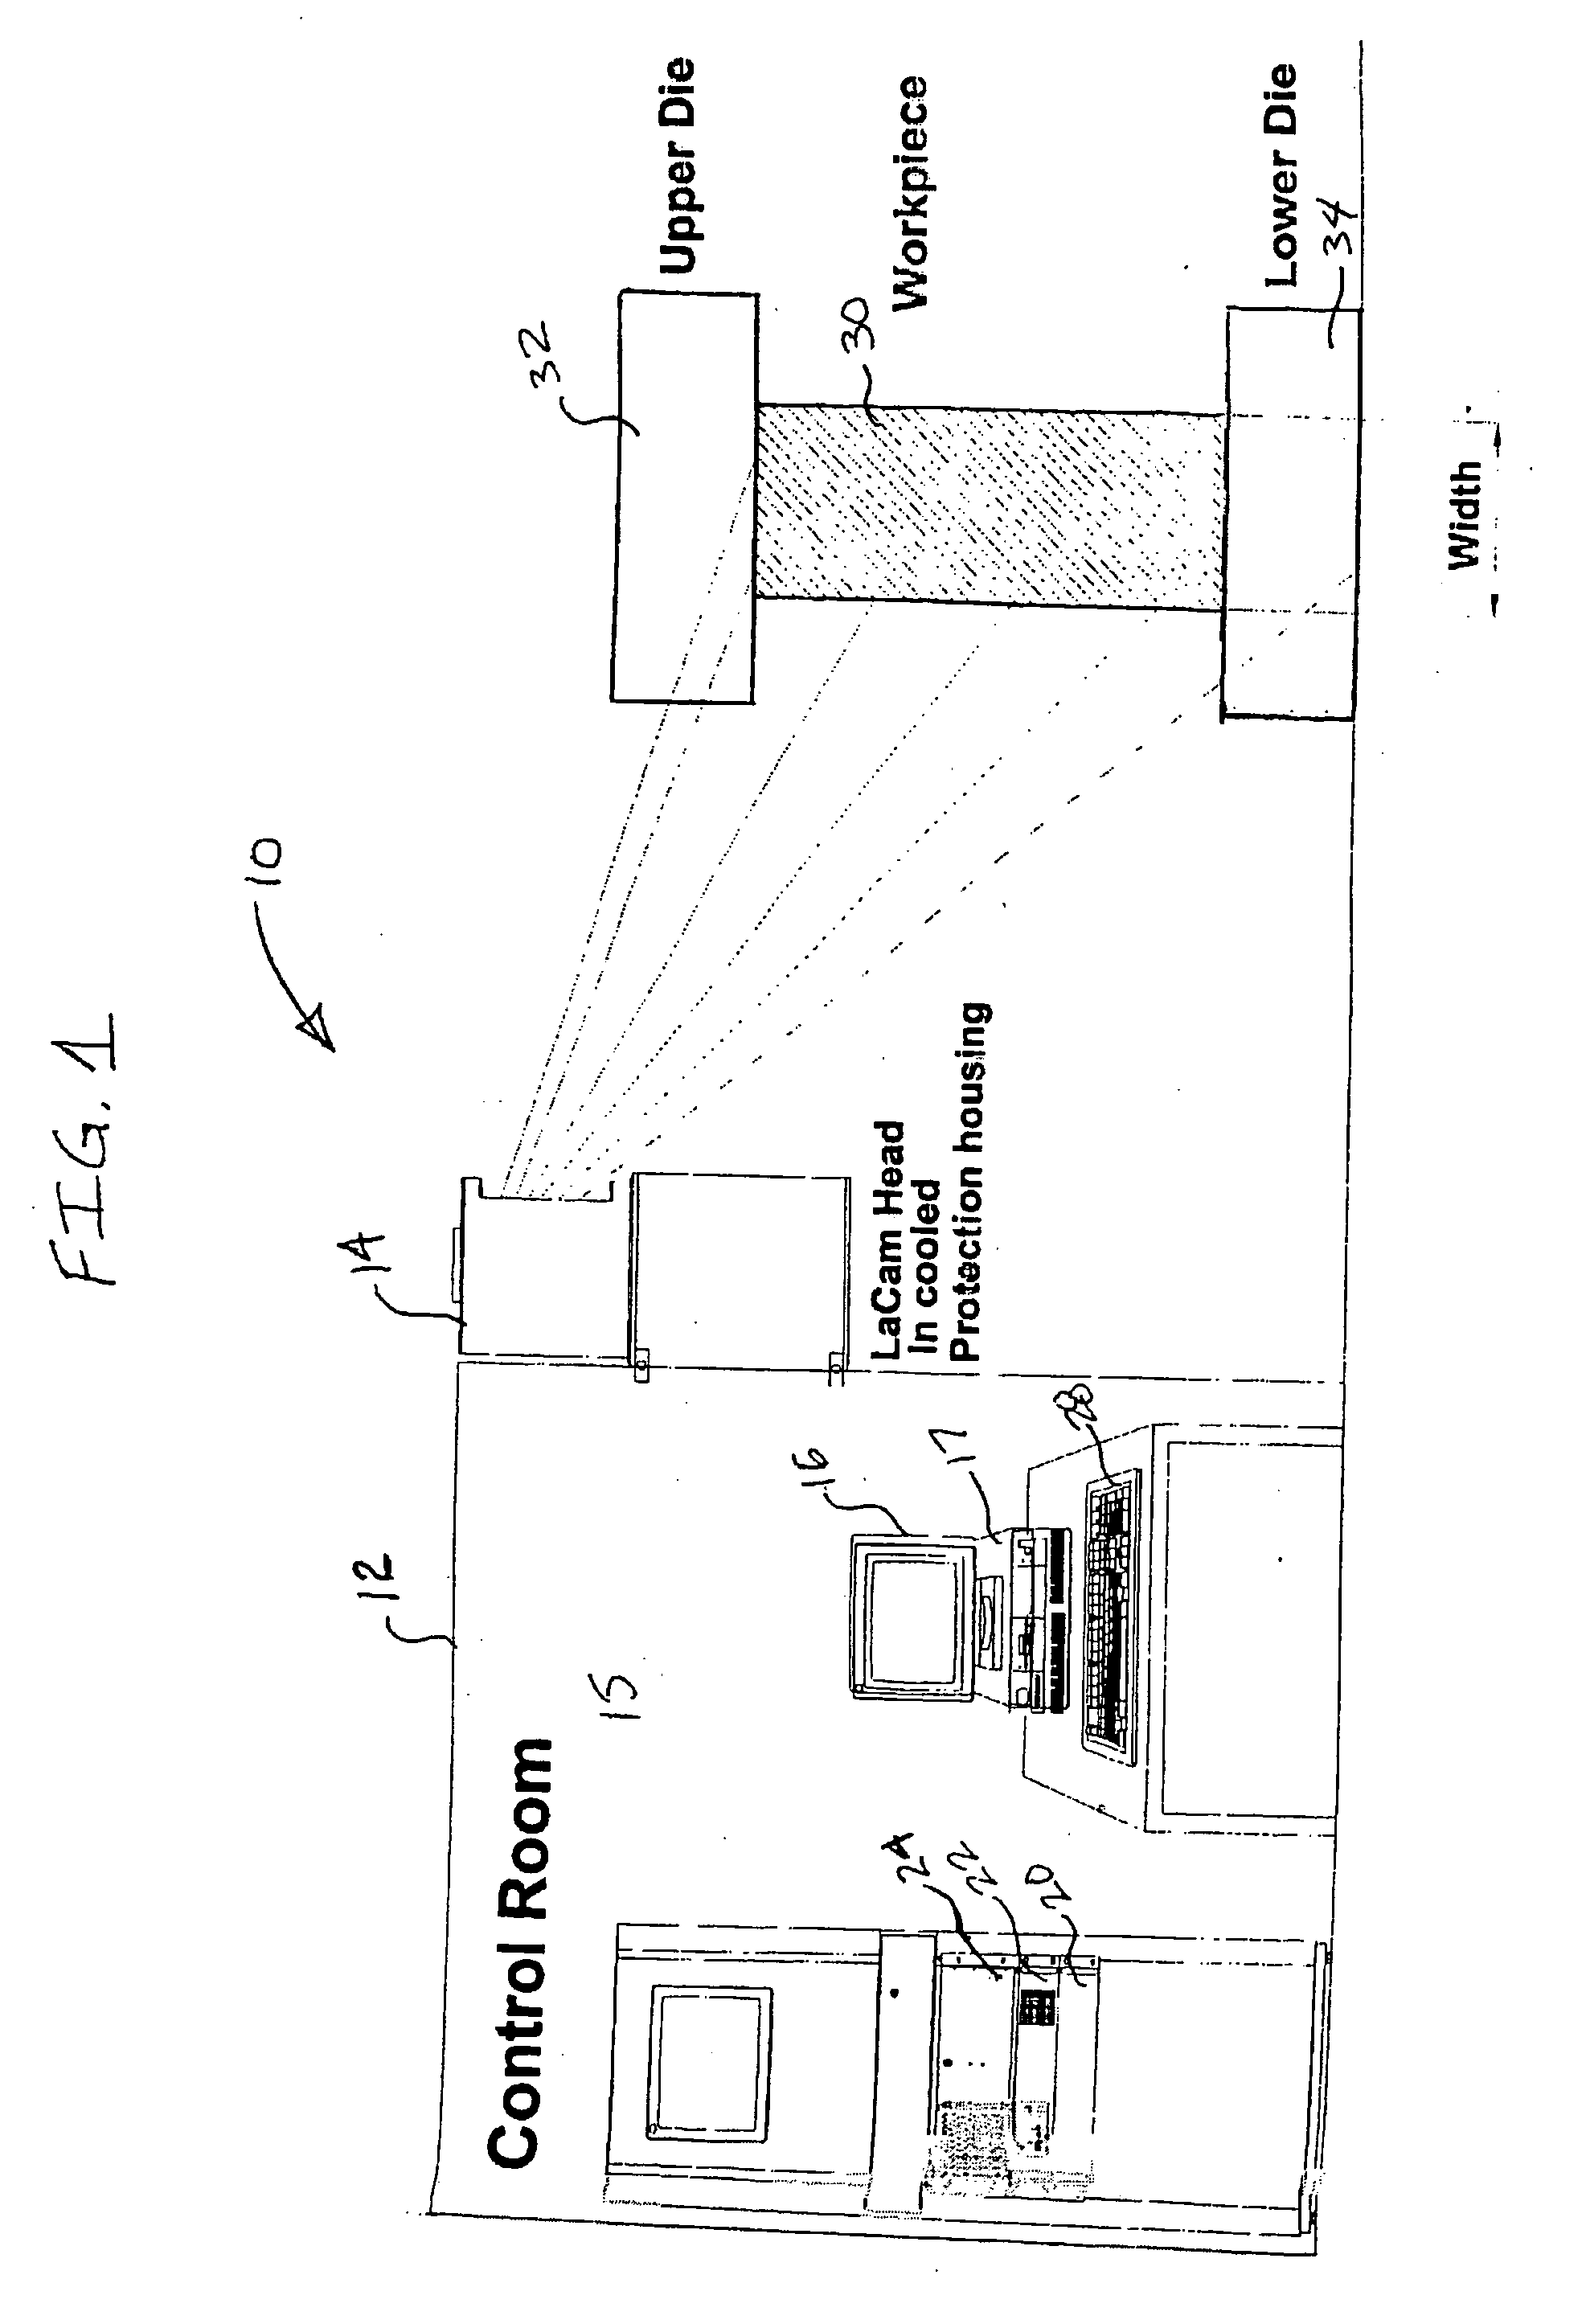 Method and apparatus for optimizing forging processes